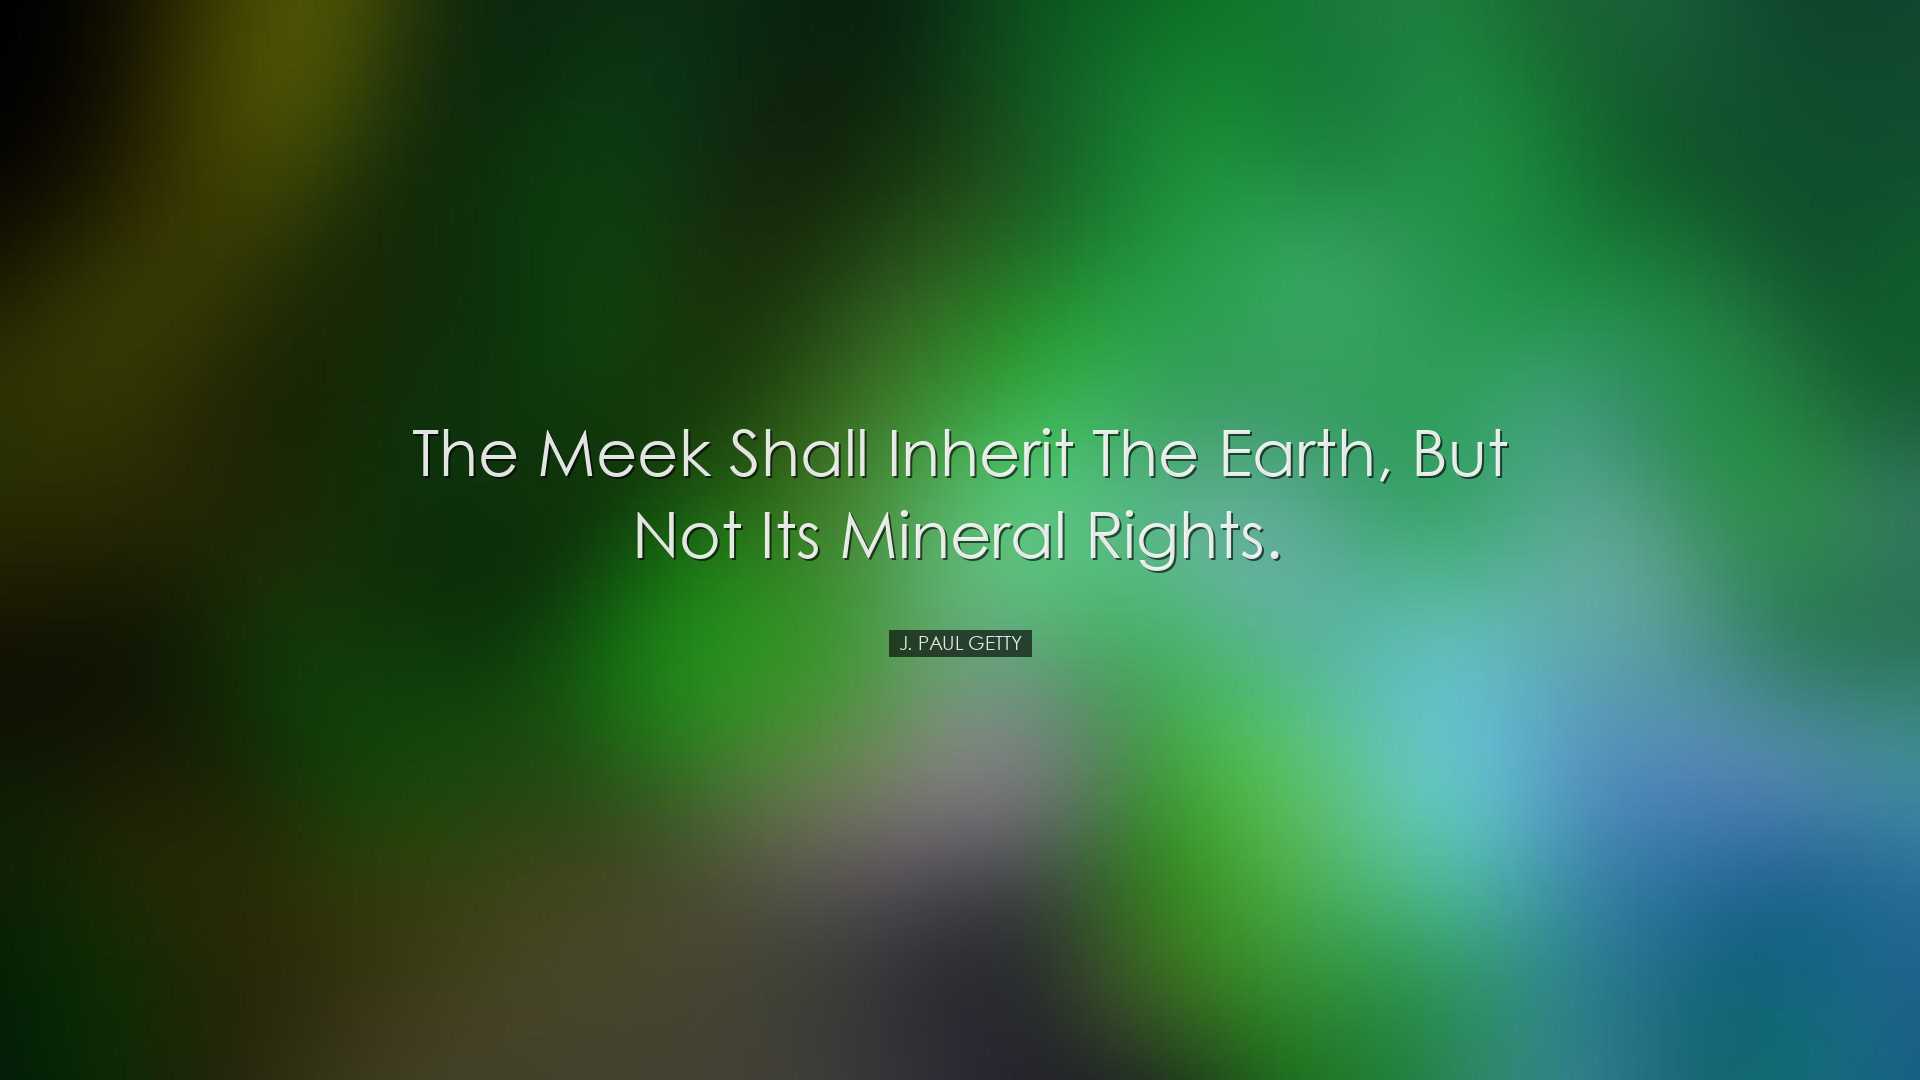 The meek shall inherit the Earth, but not its mineral rights. - J.